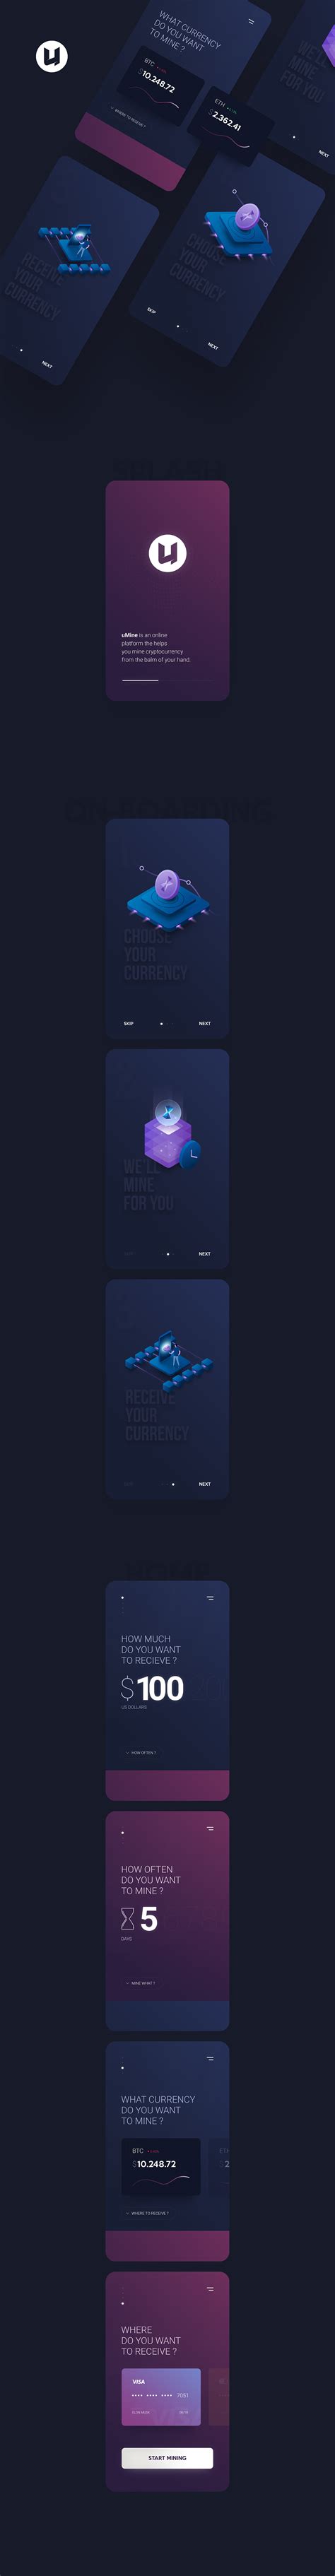 After the ban lifted on trading cryptocurrencies in india, the hype came back and people started looking again as to where should one go to buy cryptocurrencies. cryptocurrency mining app on Behance